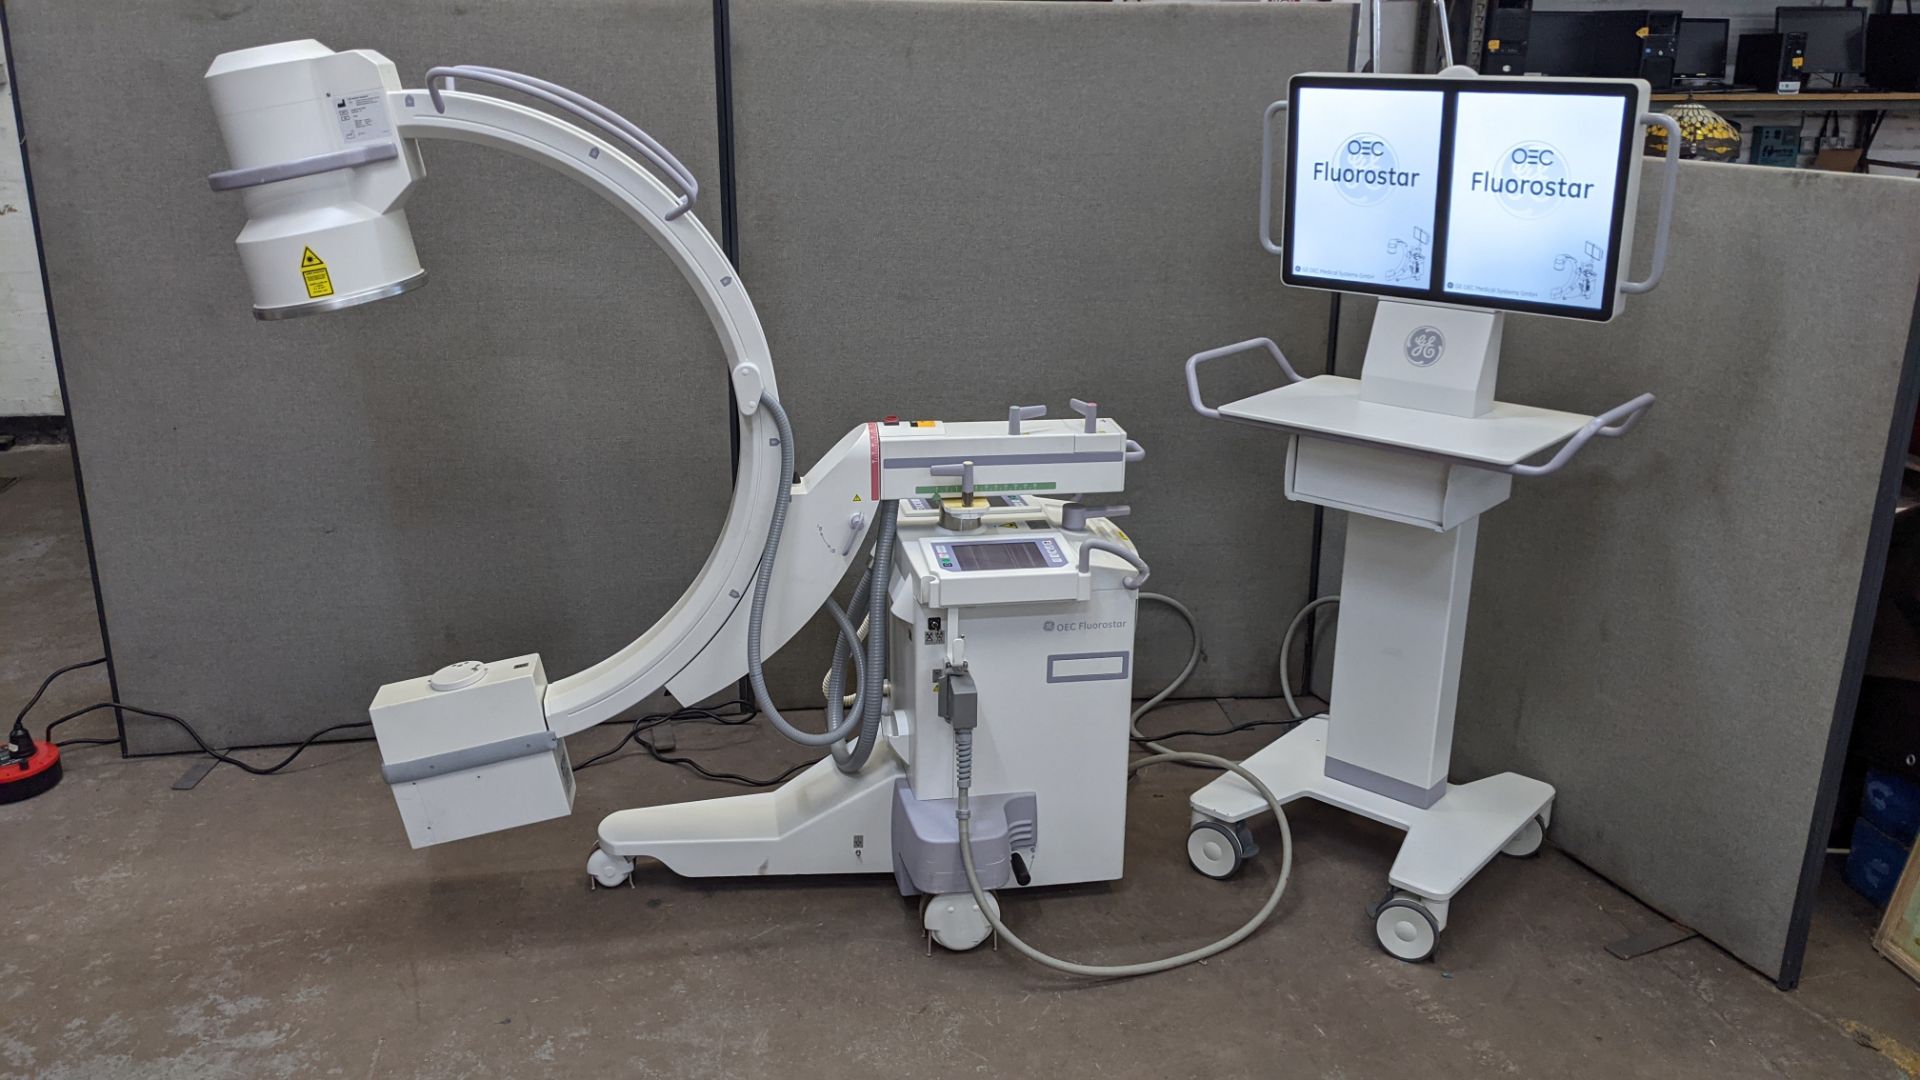 GE-OEC Fluorostar imaging system, purchased new in August 2017. EO4 Series. - Image 2 of 68